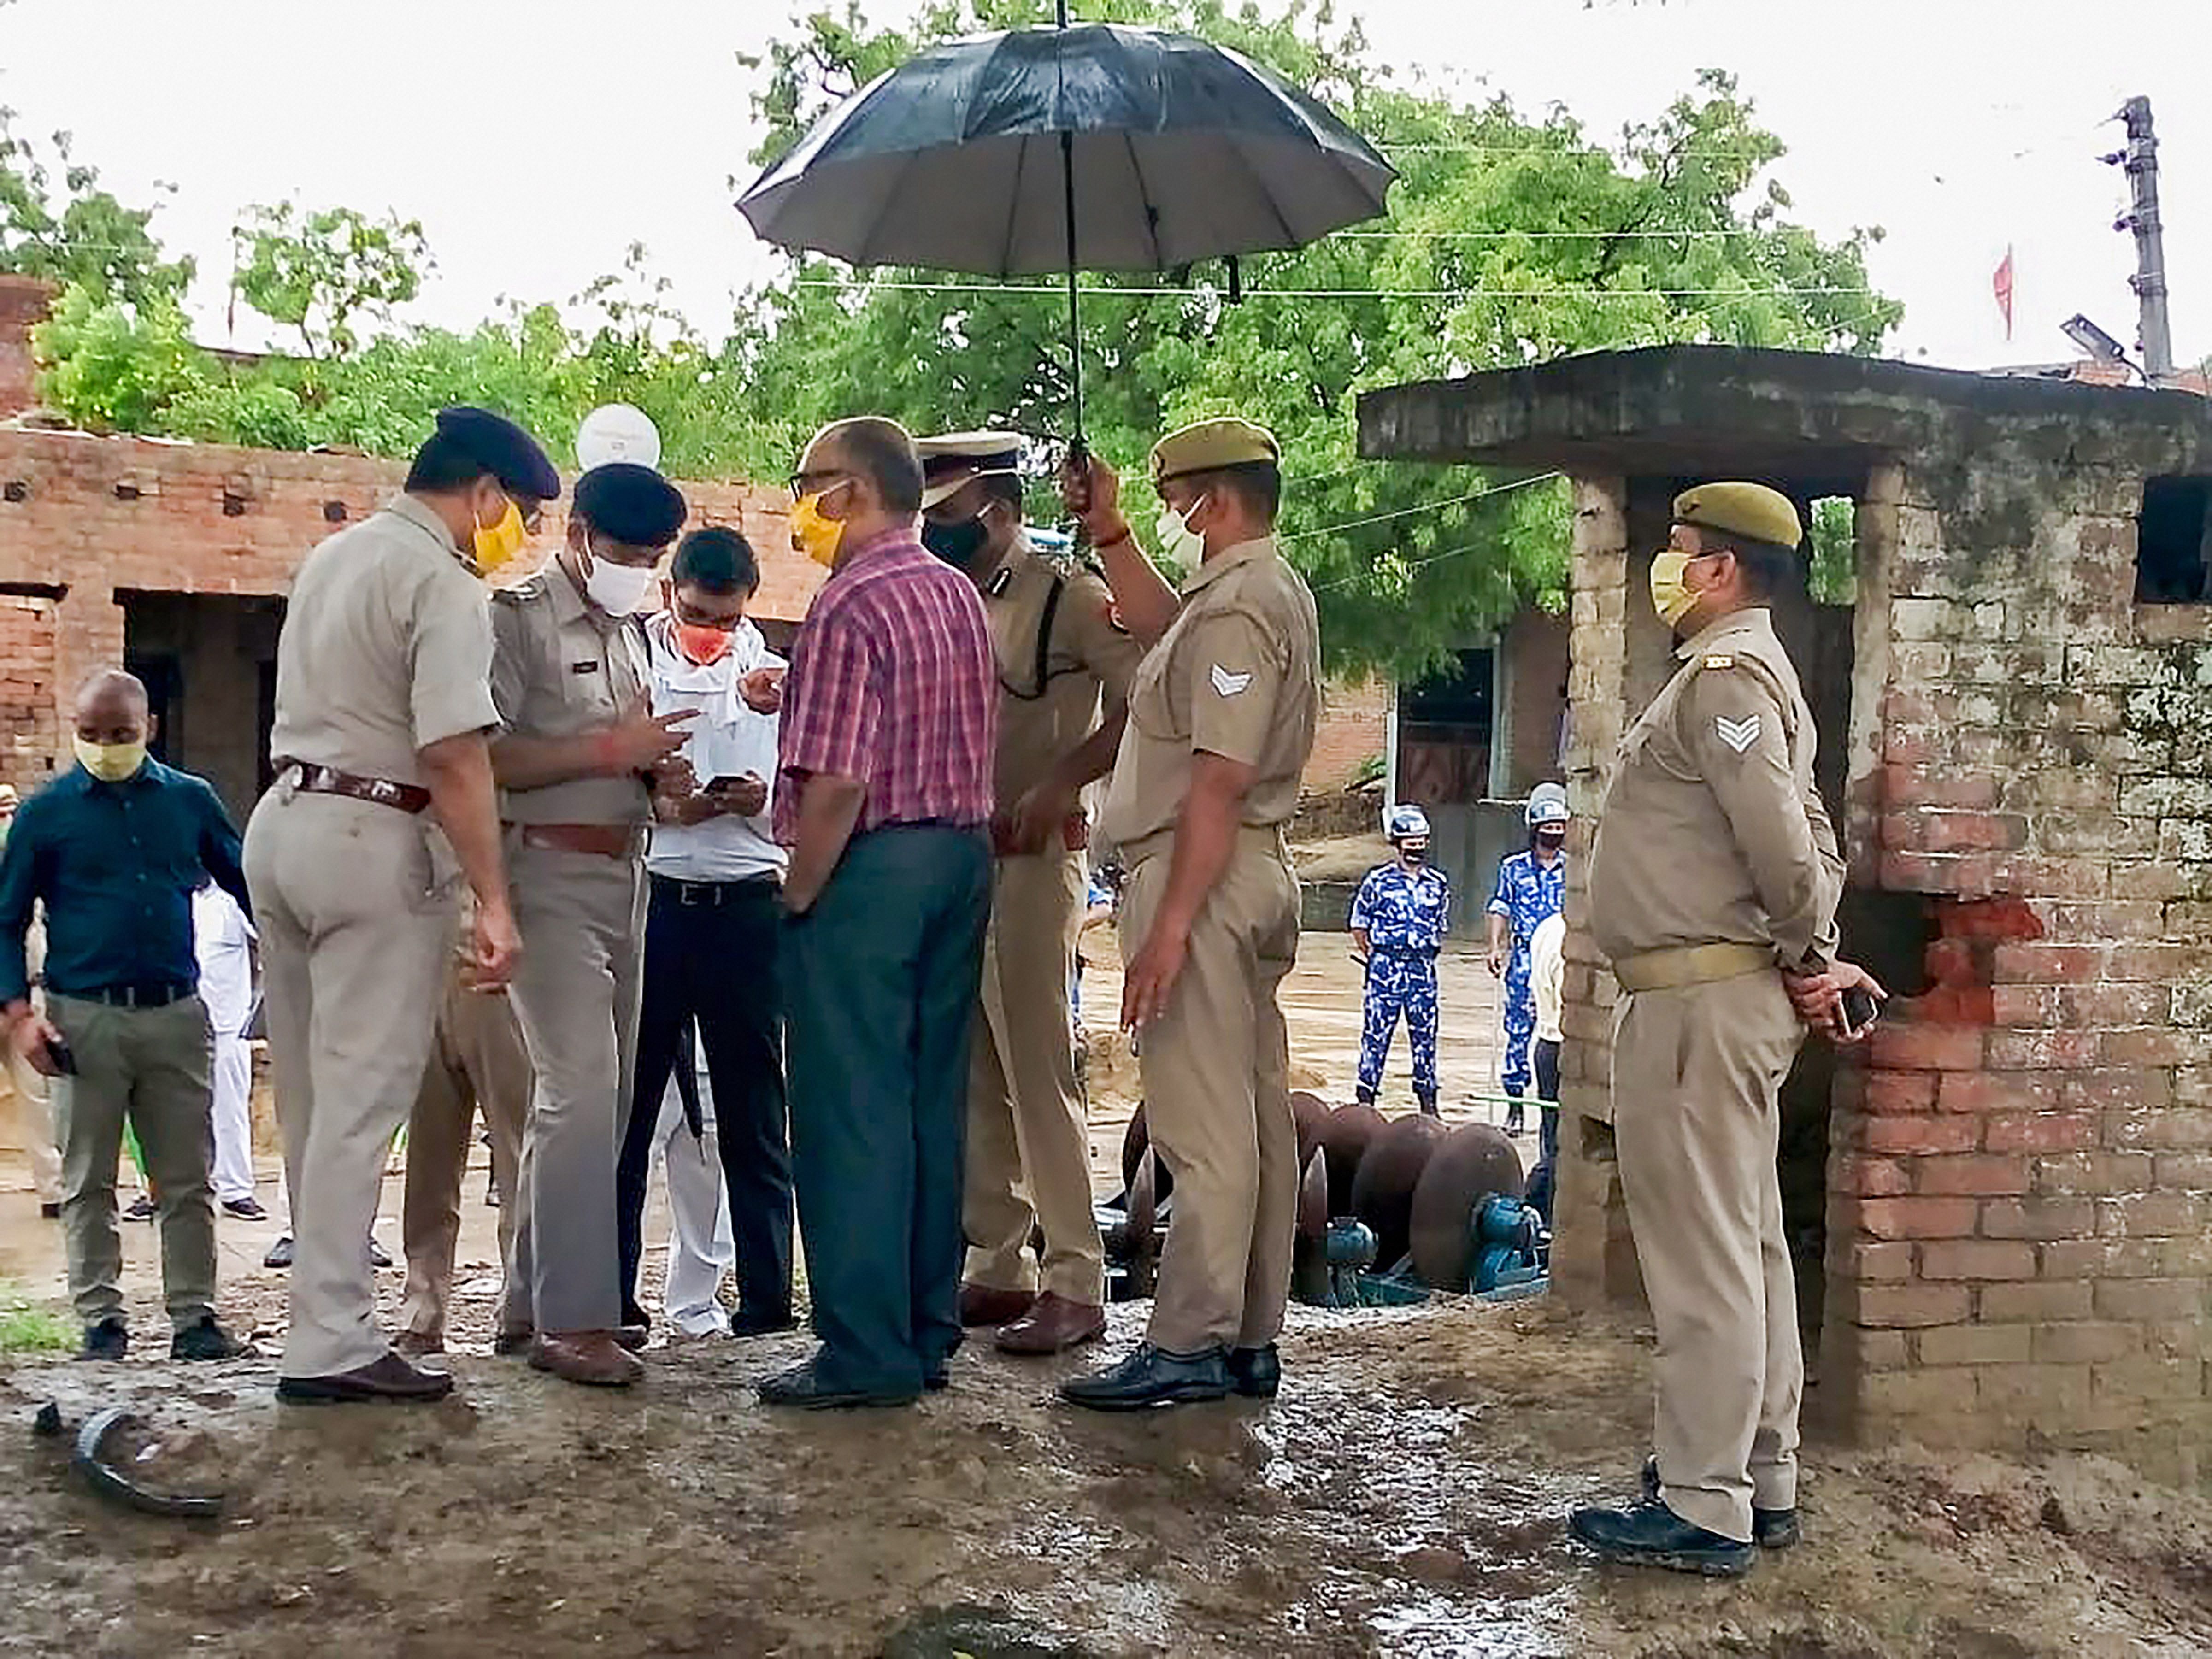 A Special Investigation Team visits the Bikru village, where eight policemen were killed by gangster Vikas Dubey on July 3, for investigation into the case, in Kanpur, Sunday, July 12, 2020. Dubey was also killed in an encounter on July 10. (PTI Photo)